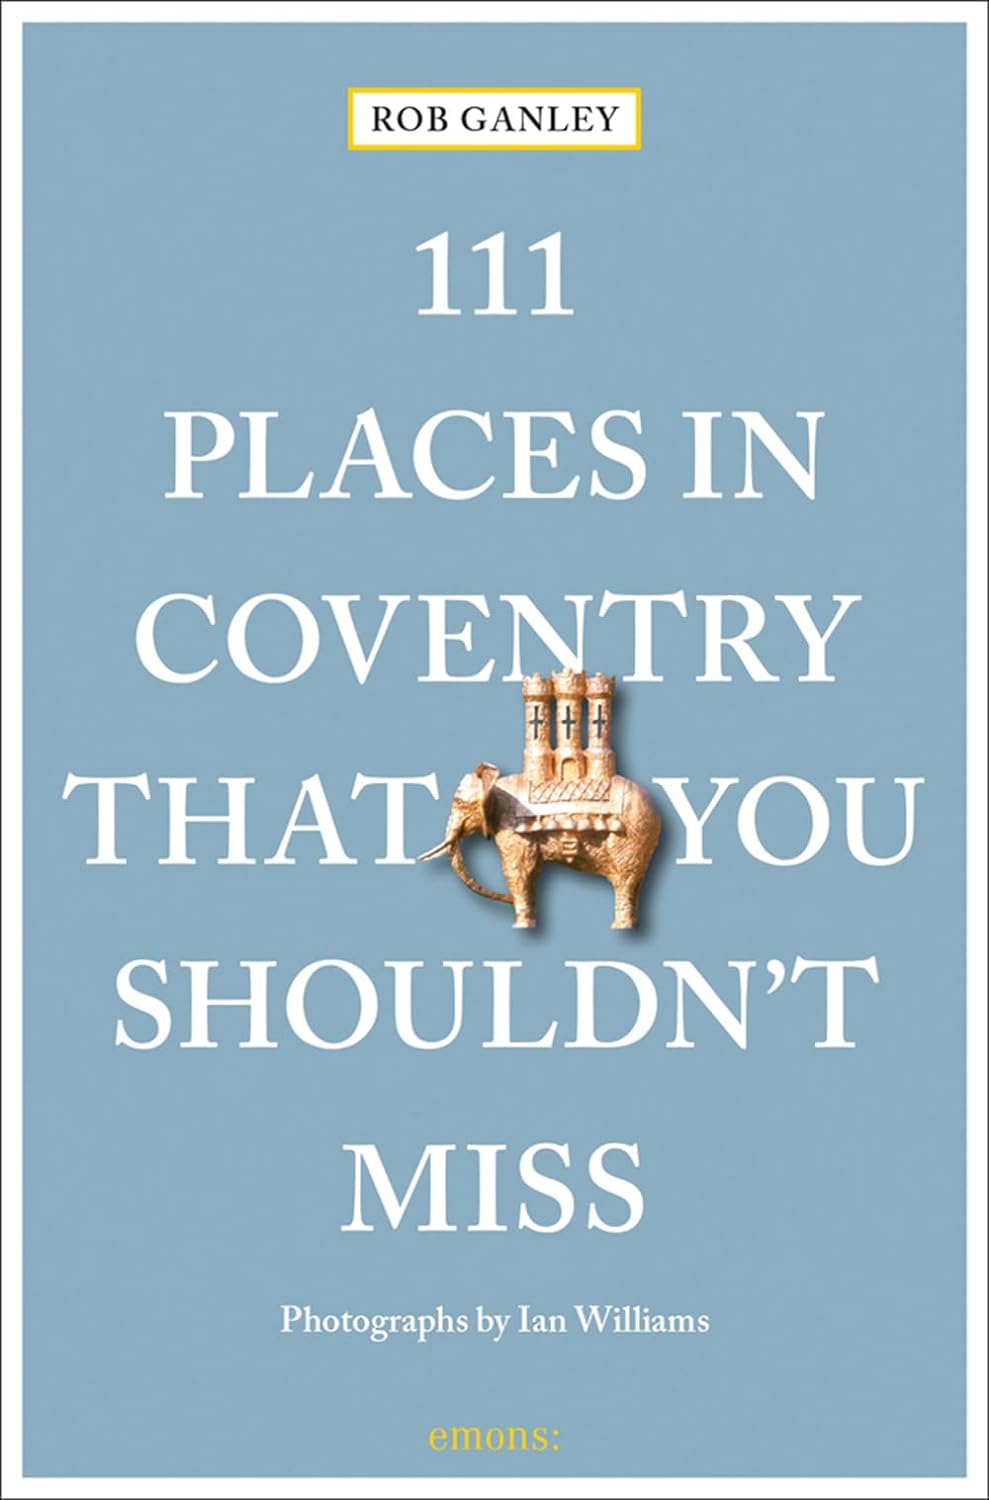 Online bestellen: Reisgids 111 places in Places in Coventry That You Shouldn't Miss | Emons